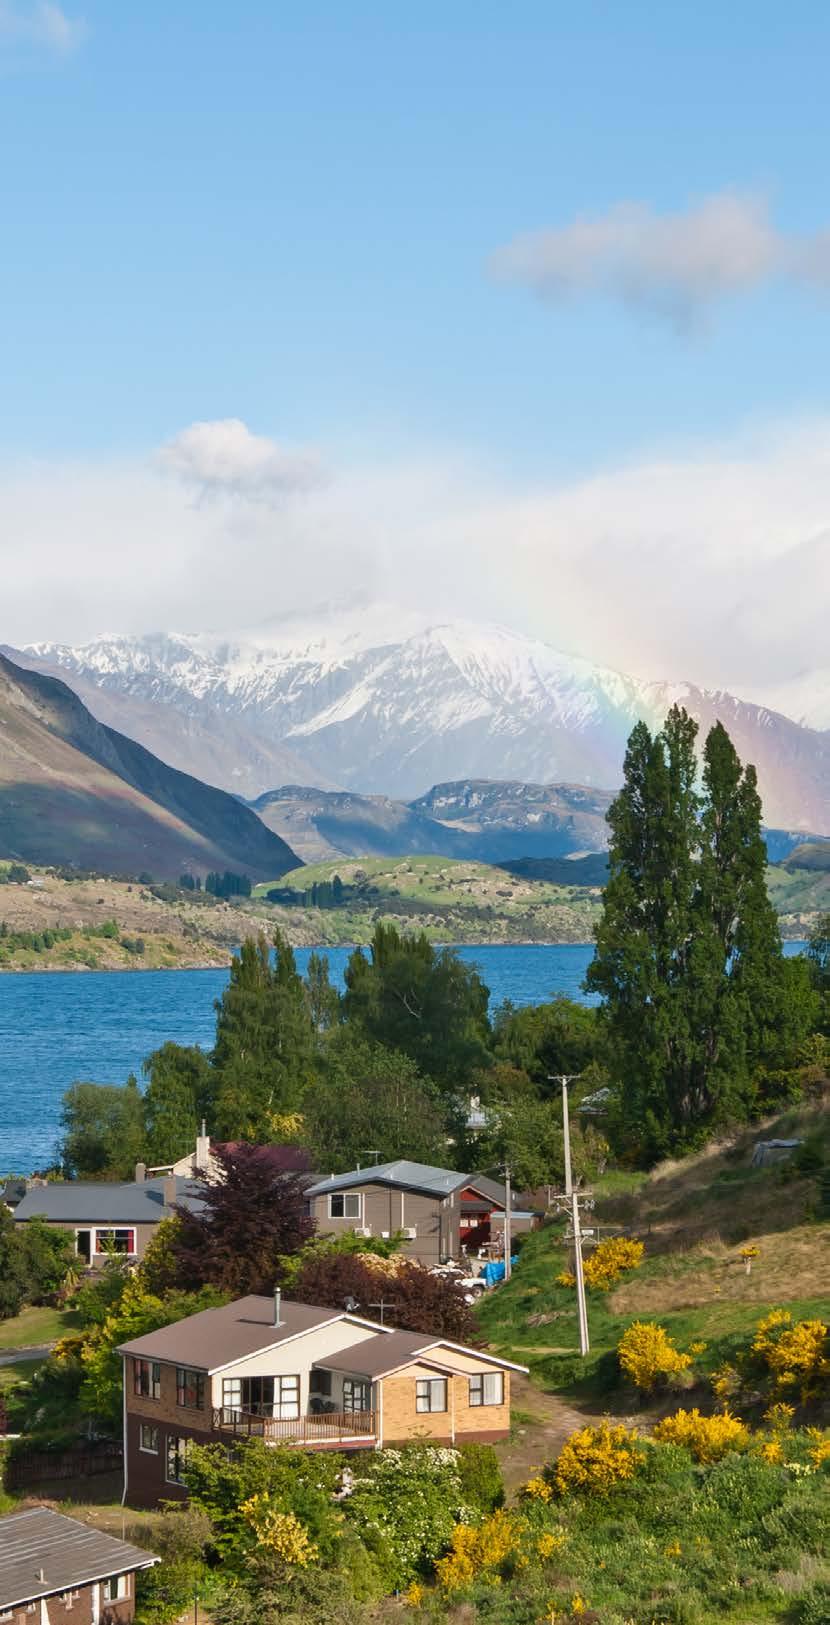 Meals: Breakfast, Dinner 29 November - Queenstown to Franz Josef Glacier As we farewell Queenstown we ll drop into Arrowtown and lakeside Wanaka, a pretty ski resort town situated on a lake front and